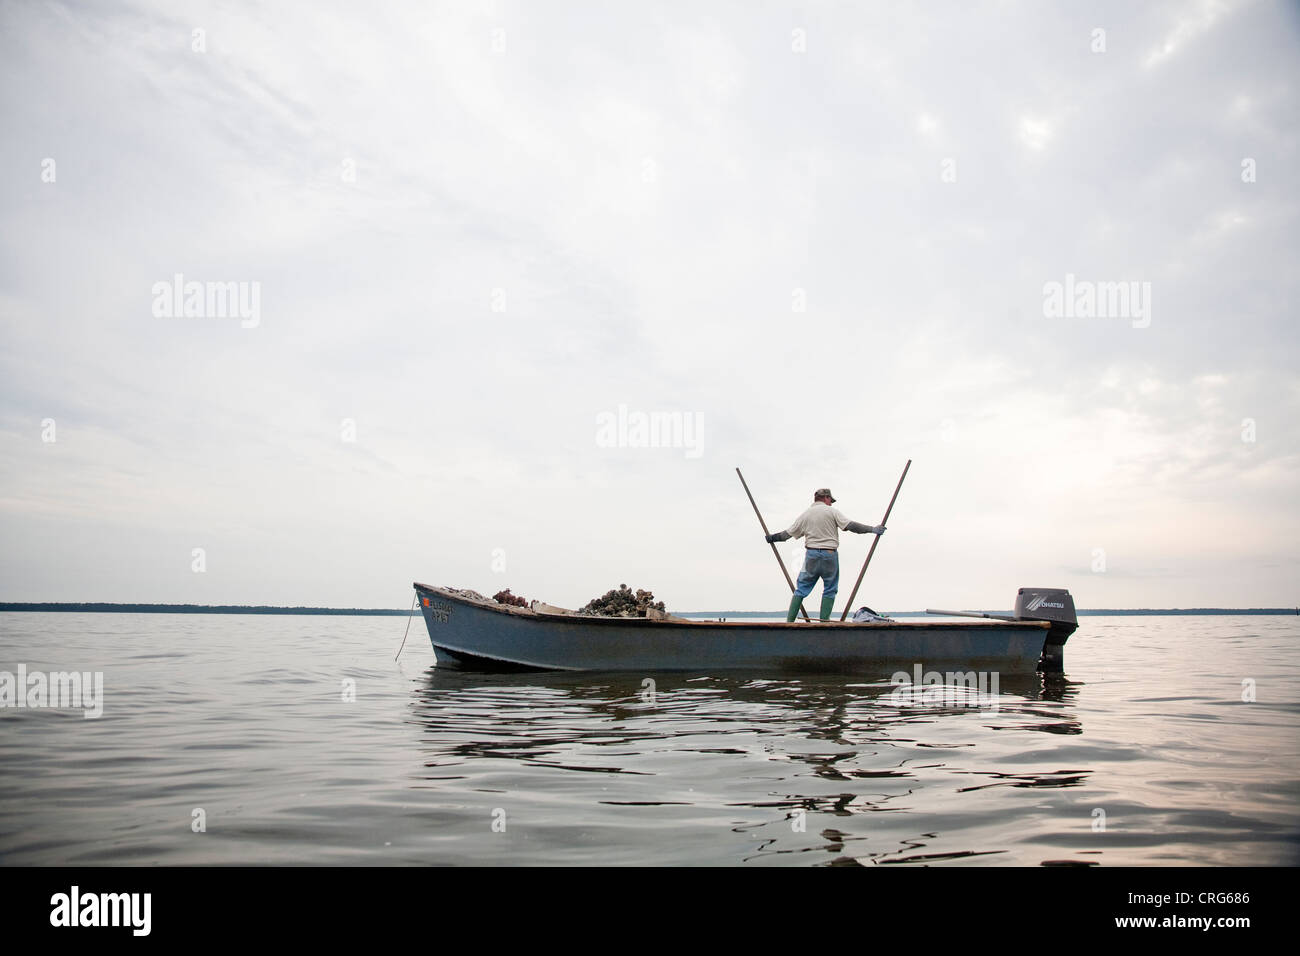 A man in jeans and rubber boots stands on a smll boat and uses an oyster tong to gather oysters in a calm body of water. Stock Photo